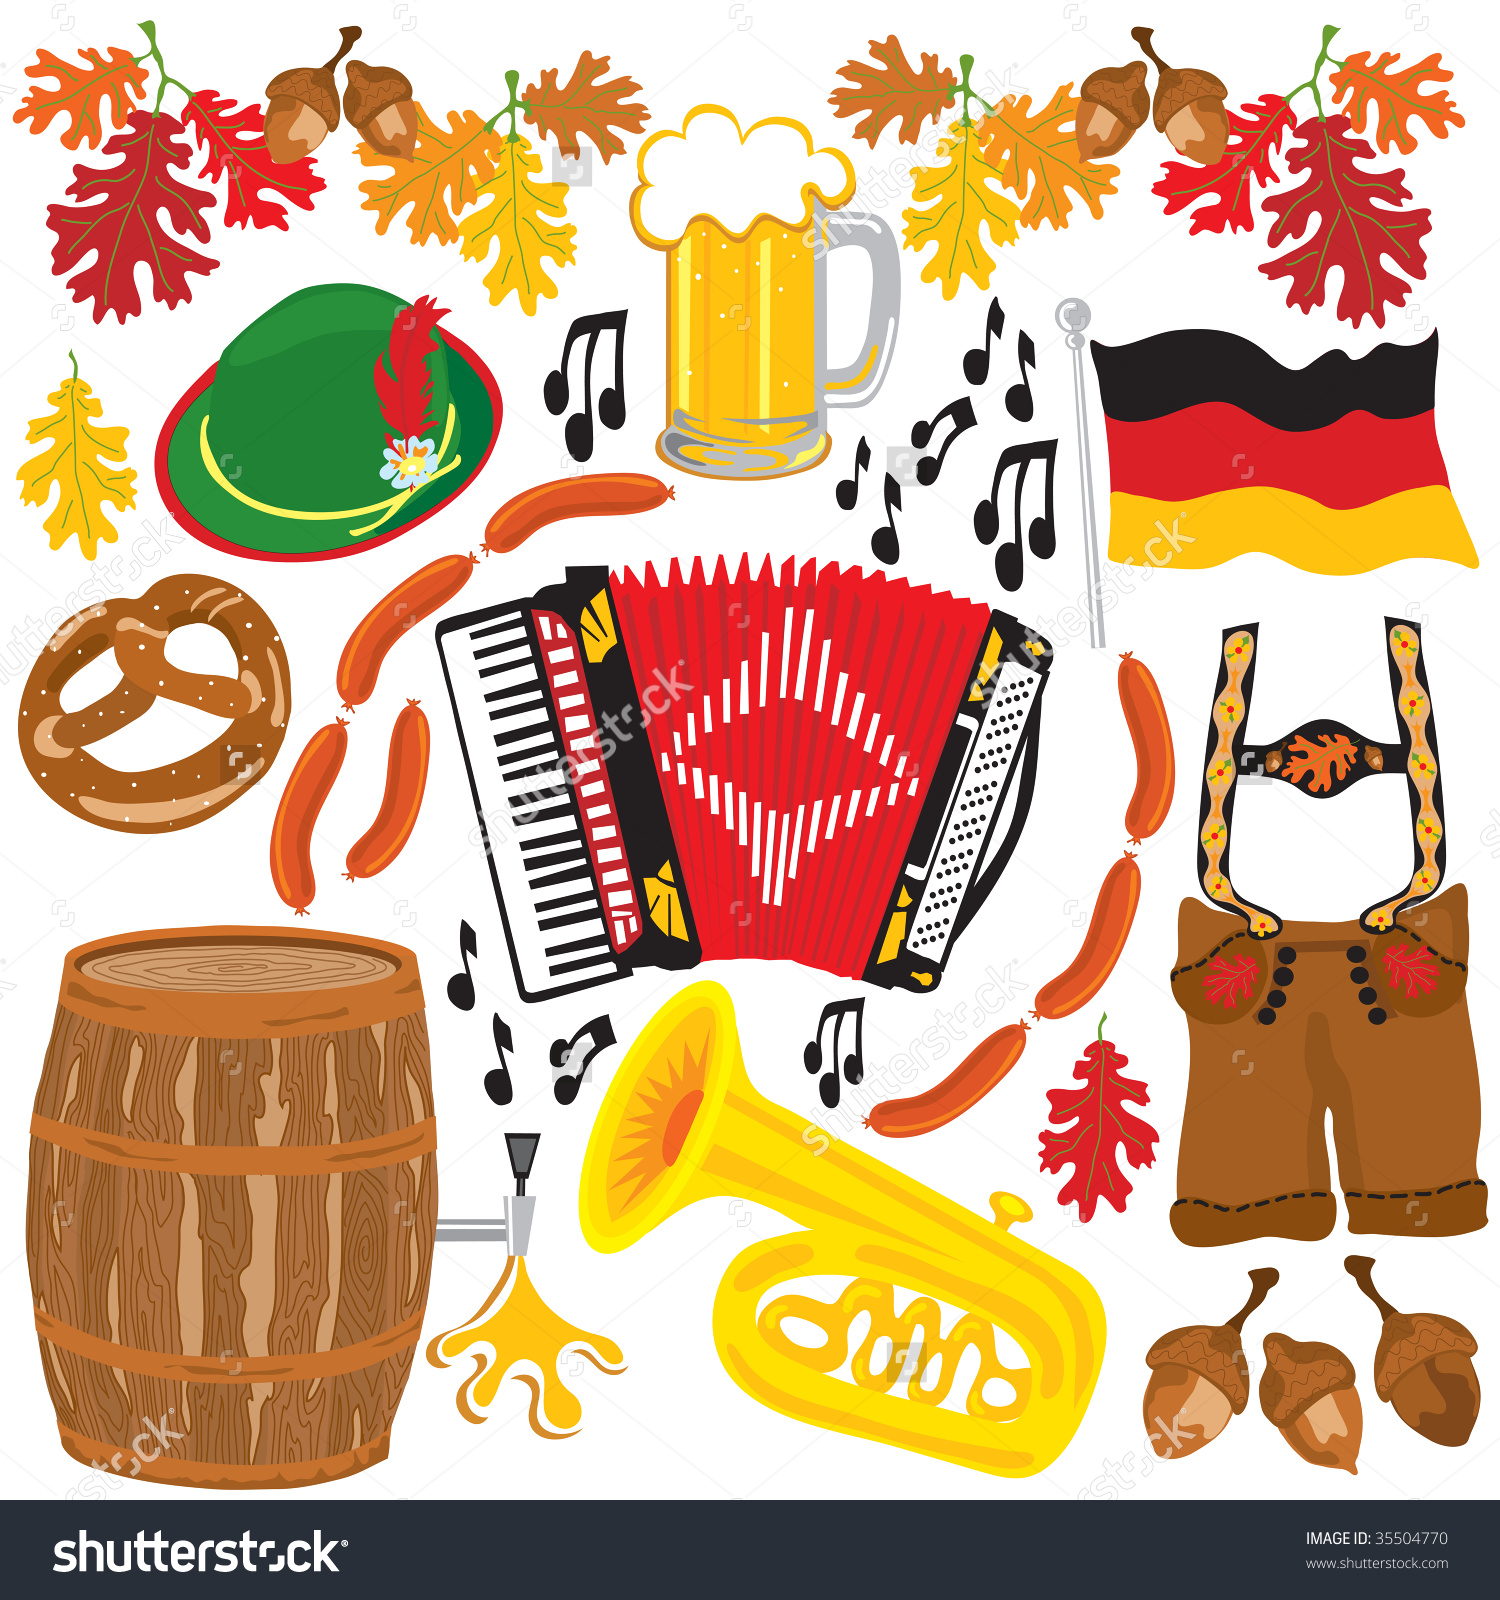 Oktoberfest Party Clipart Elements Isolated On Stock Vector.